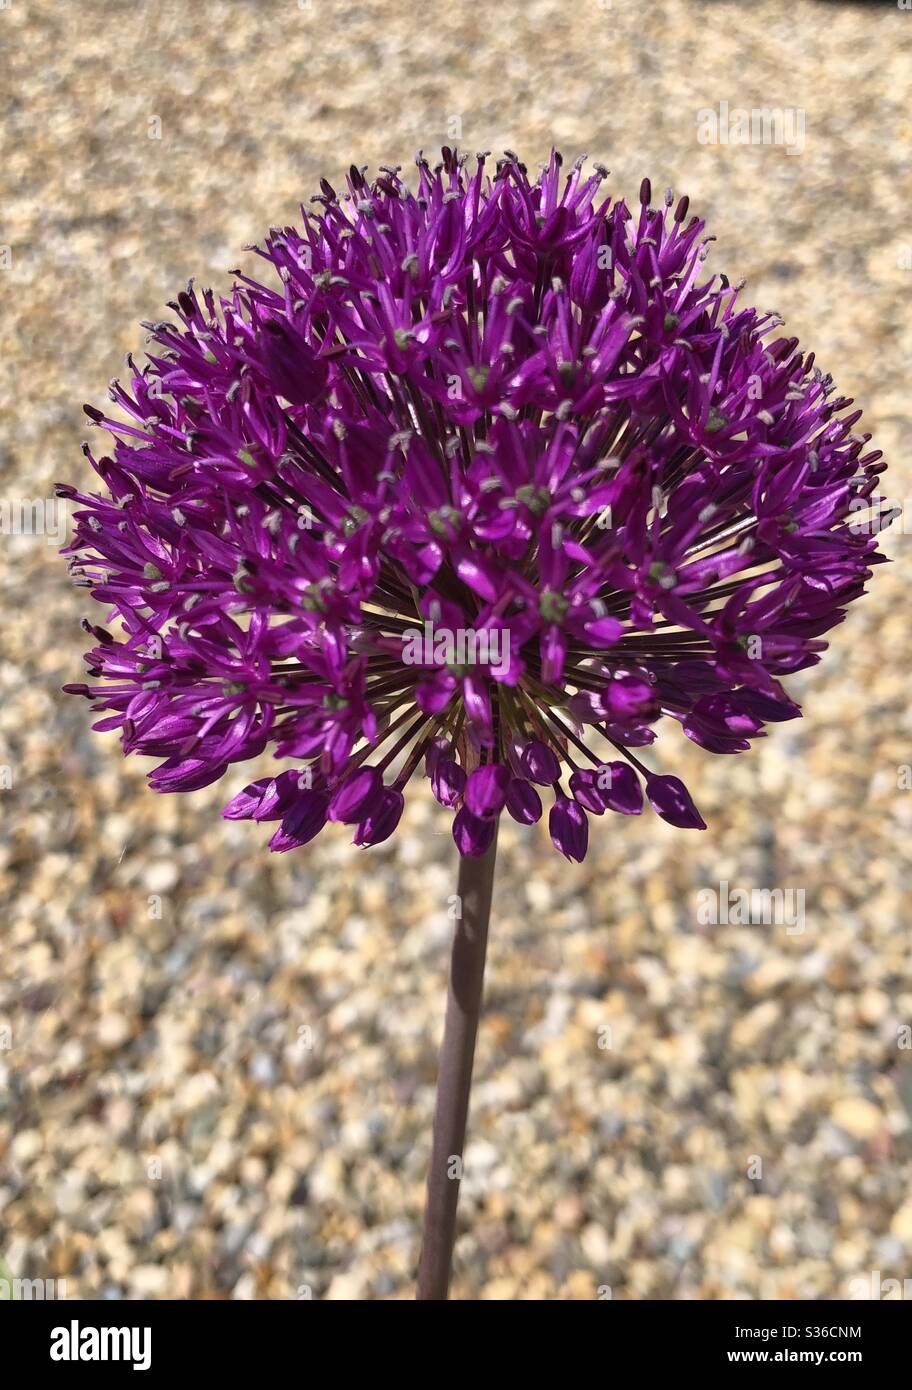 Allium plant with magenta flower against a gravel background Stock Photo